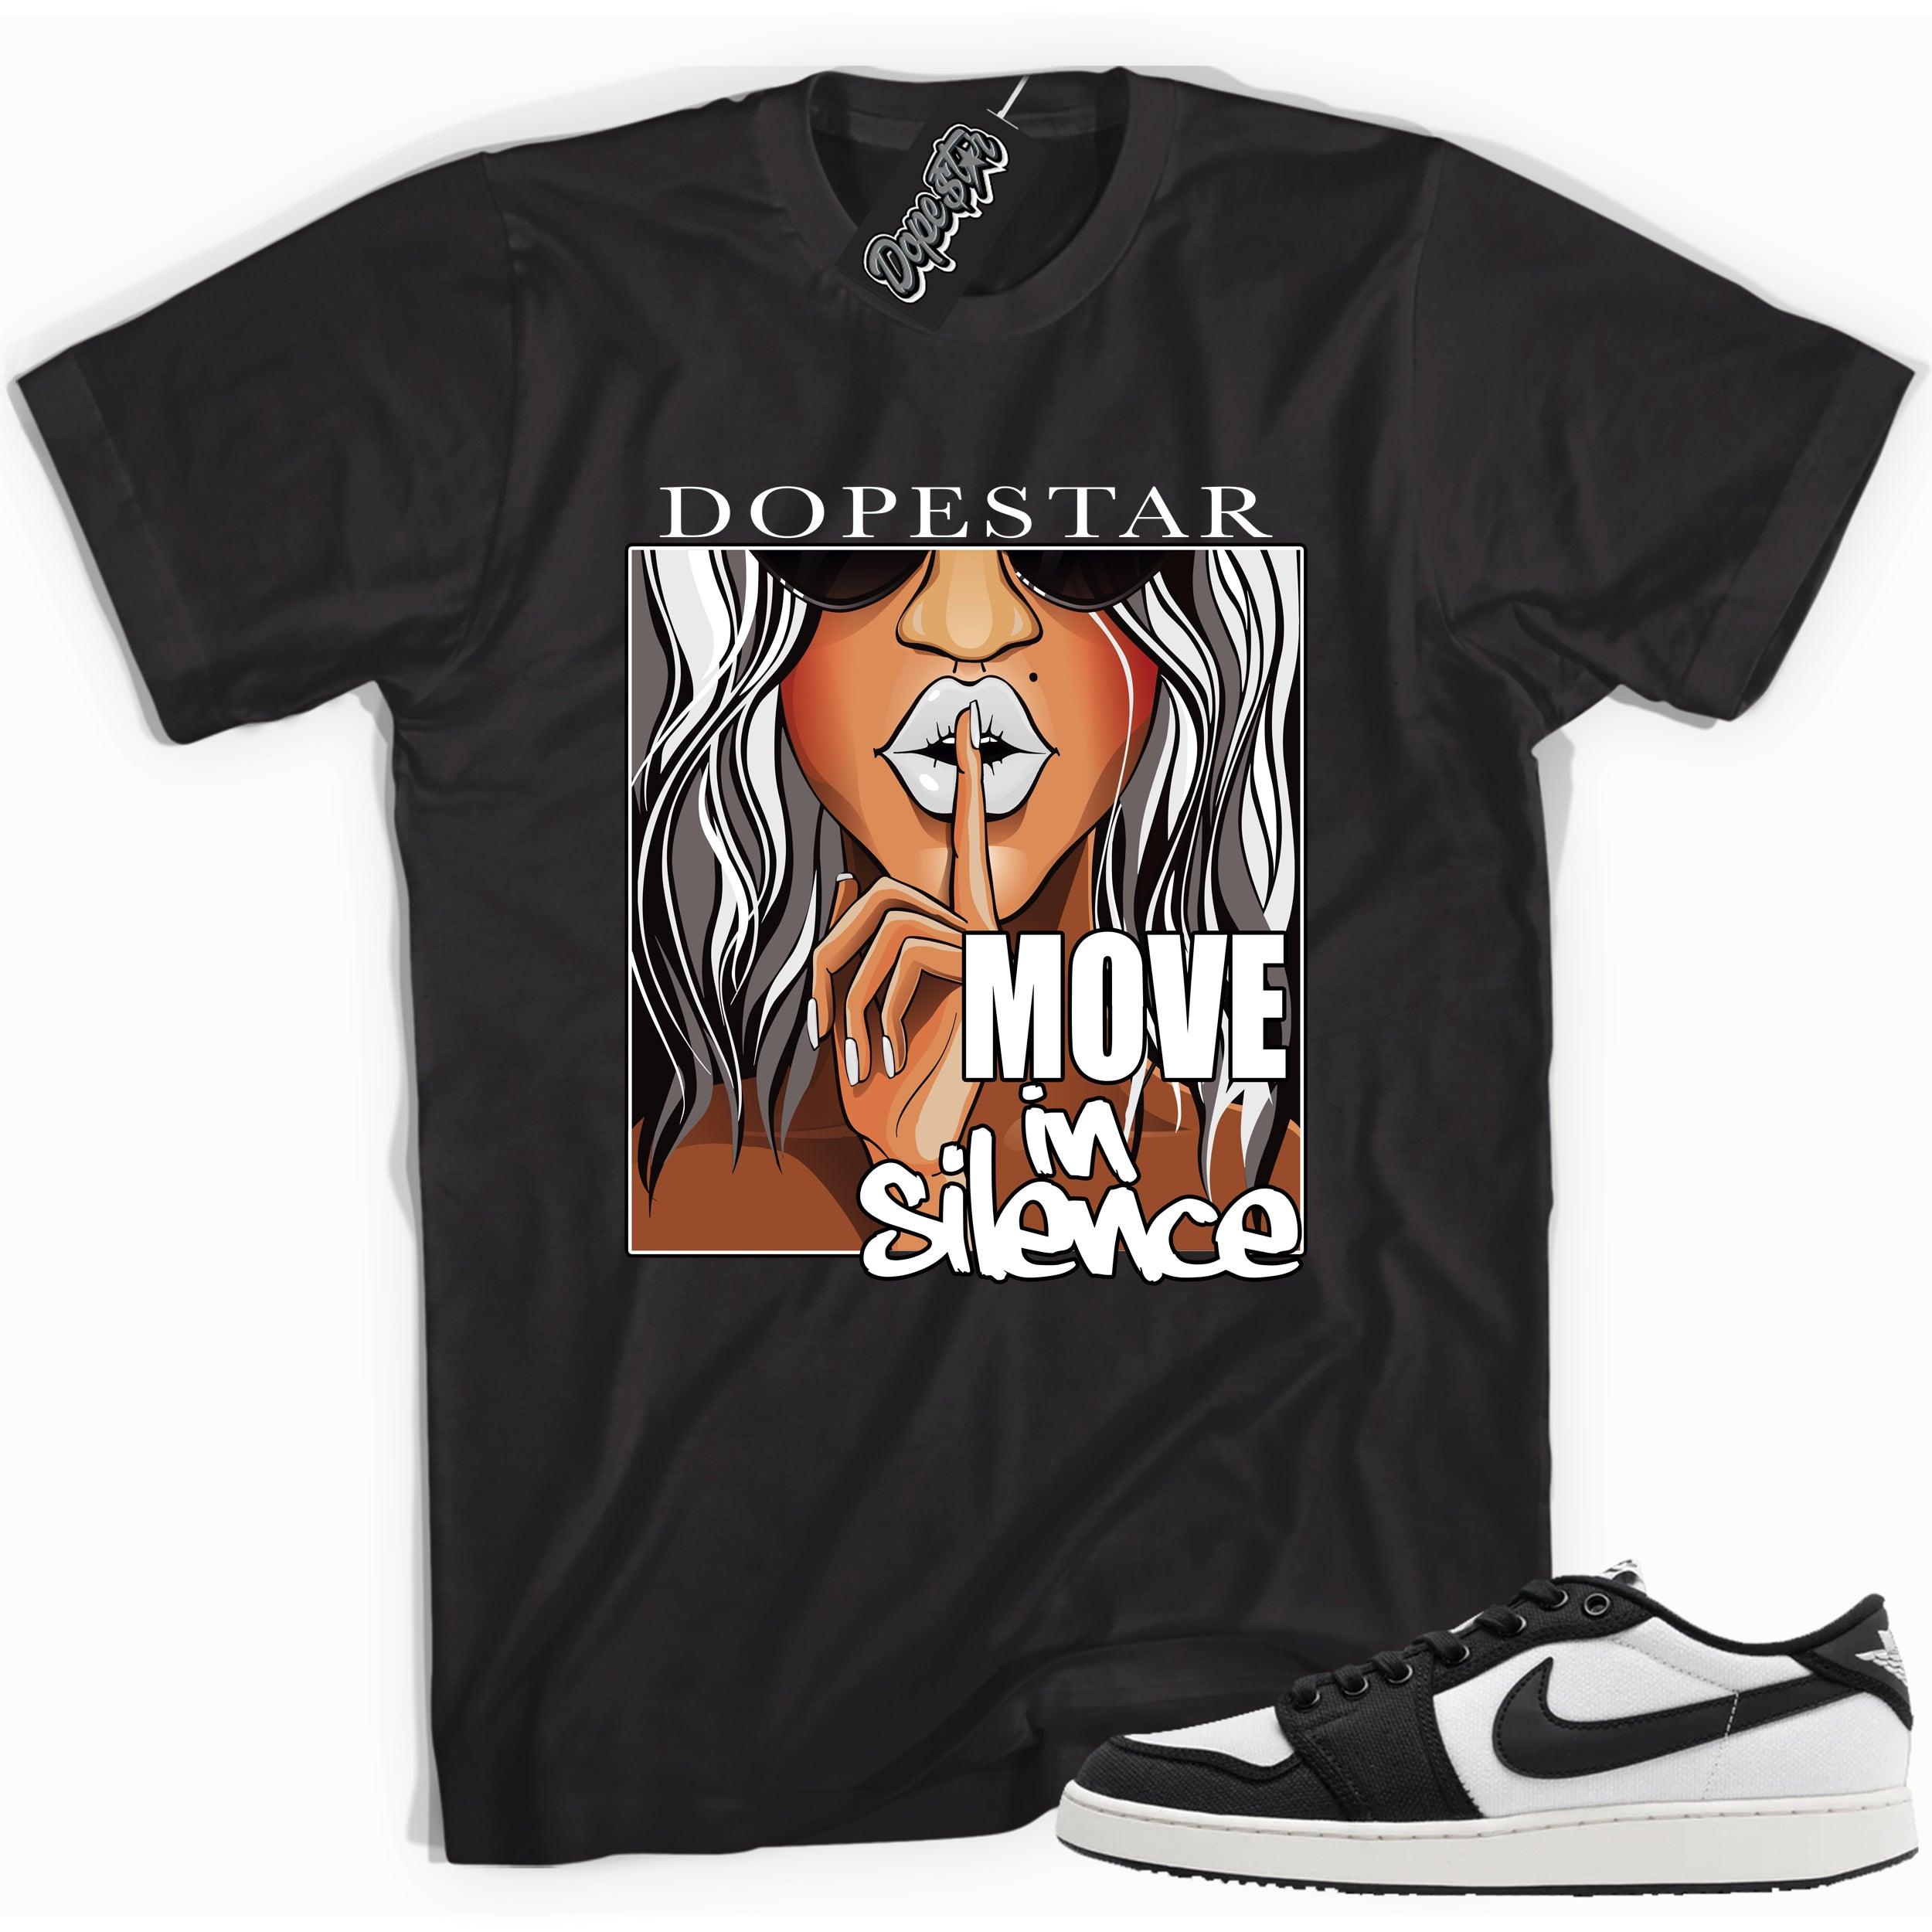 Cool black graphic tee with 'move in silence' print, that perfectly matches Air Jordan 1 Retro Ajko Low Black & White sneakers.